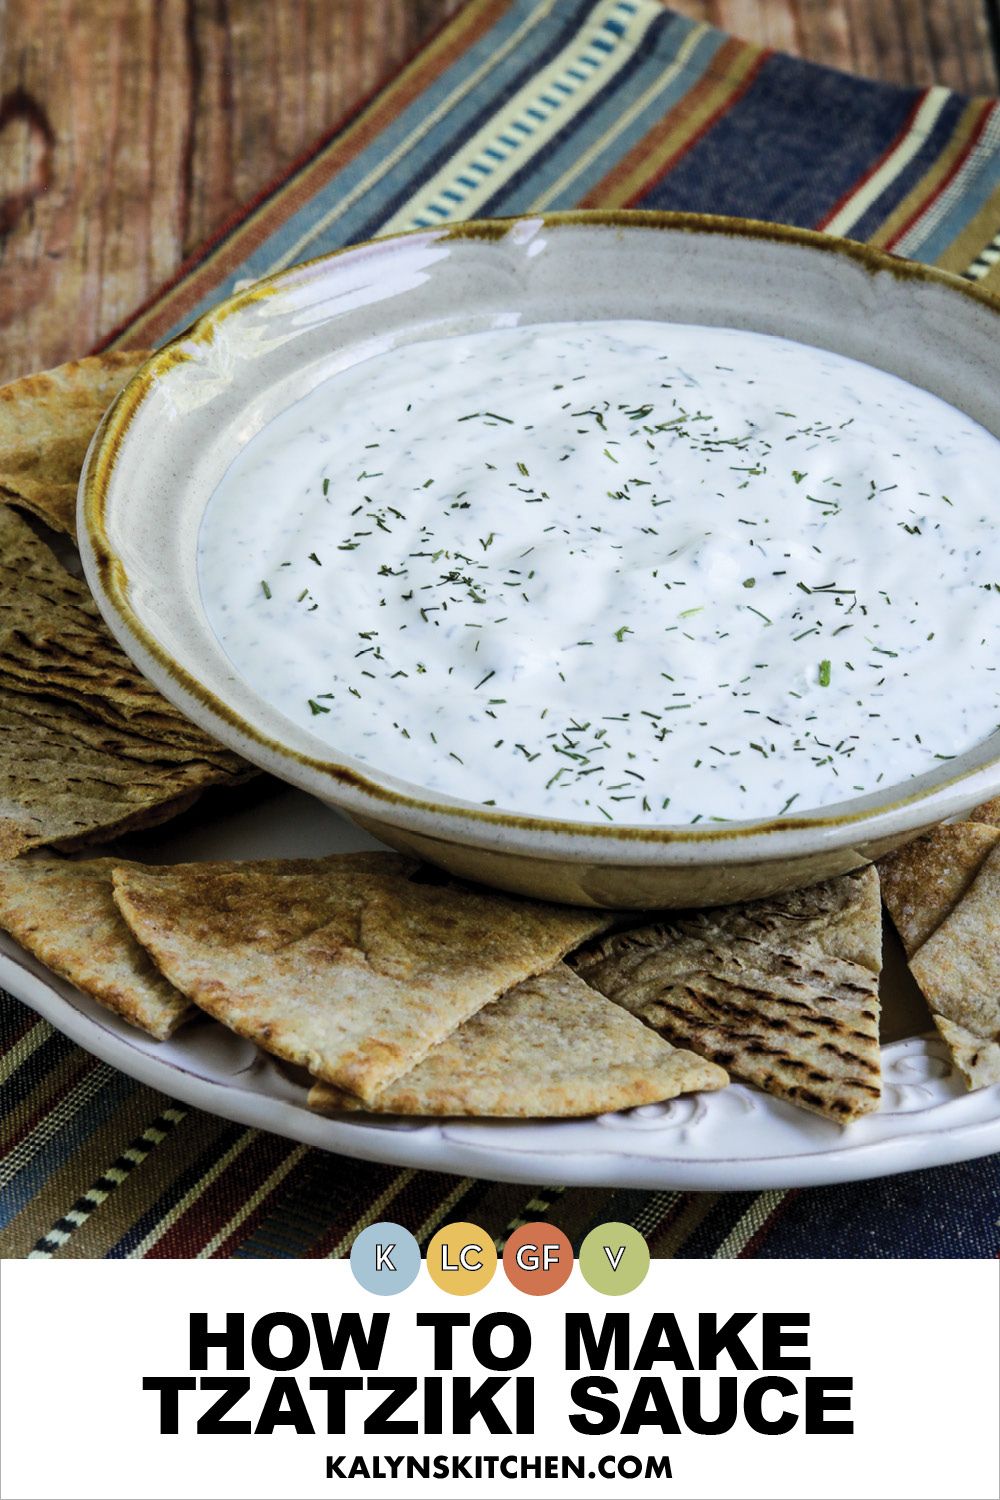 Pinterest image for How to Make Tzatziki Sauce showing Tzatziki in bowl on plate with pita bread.